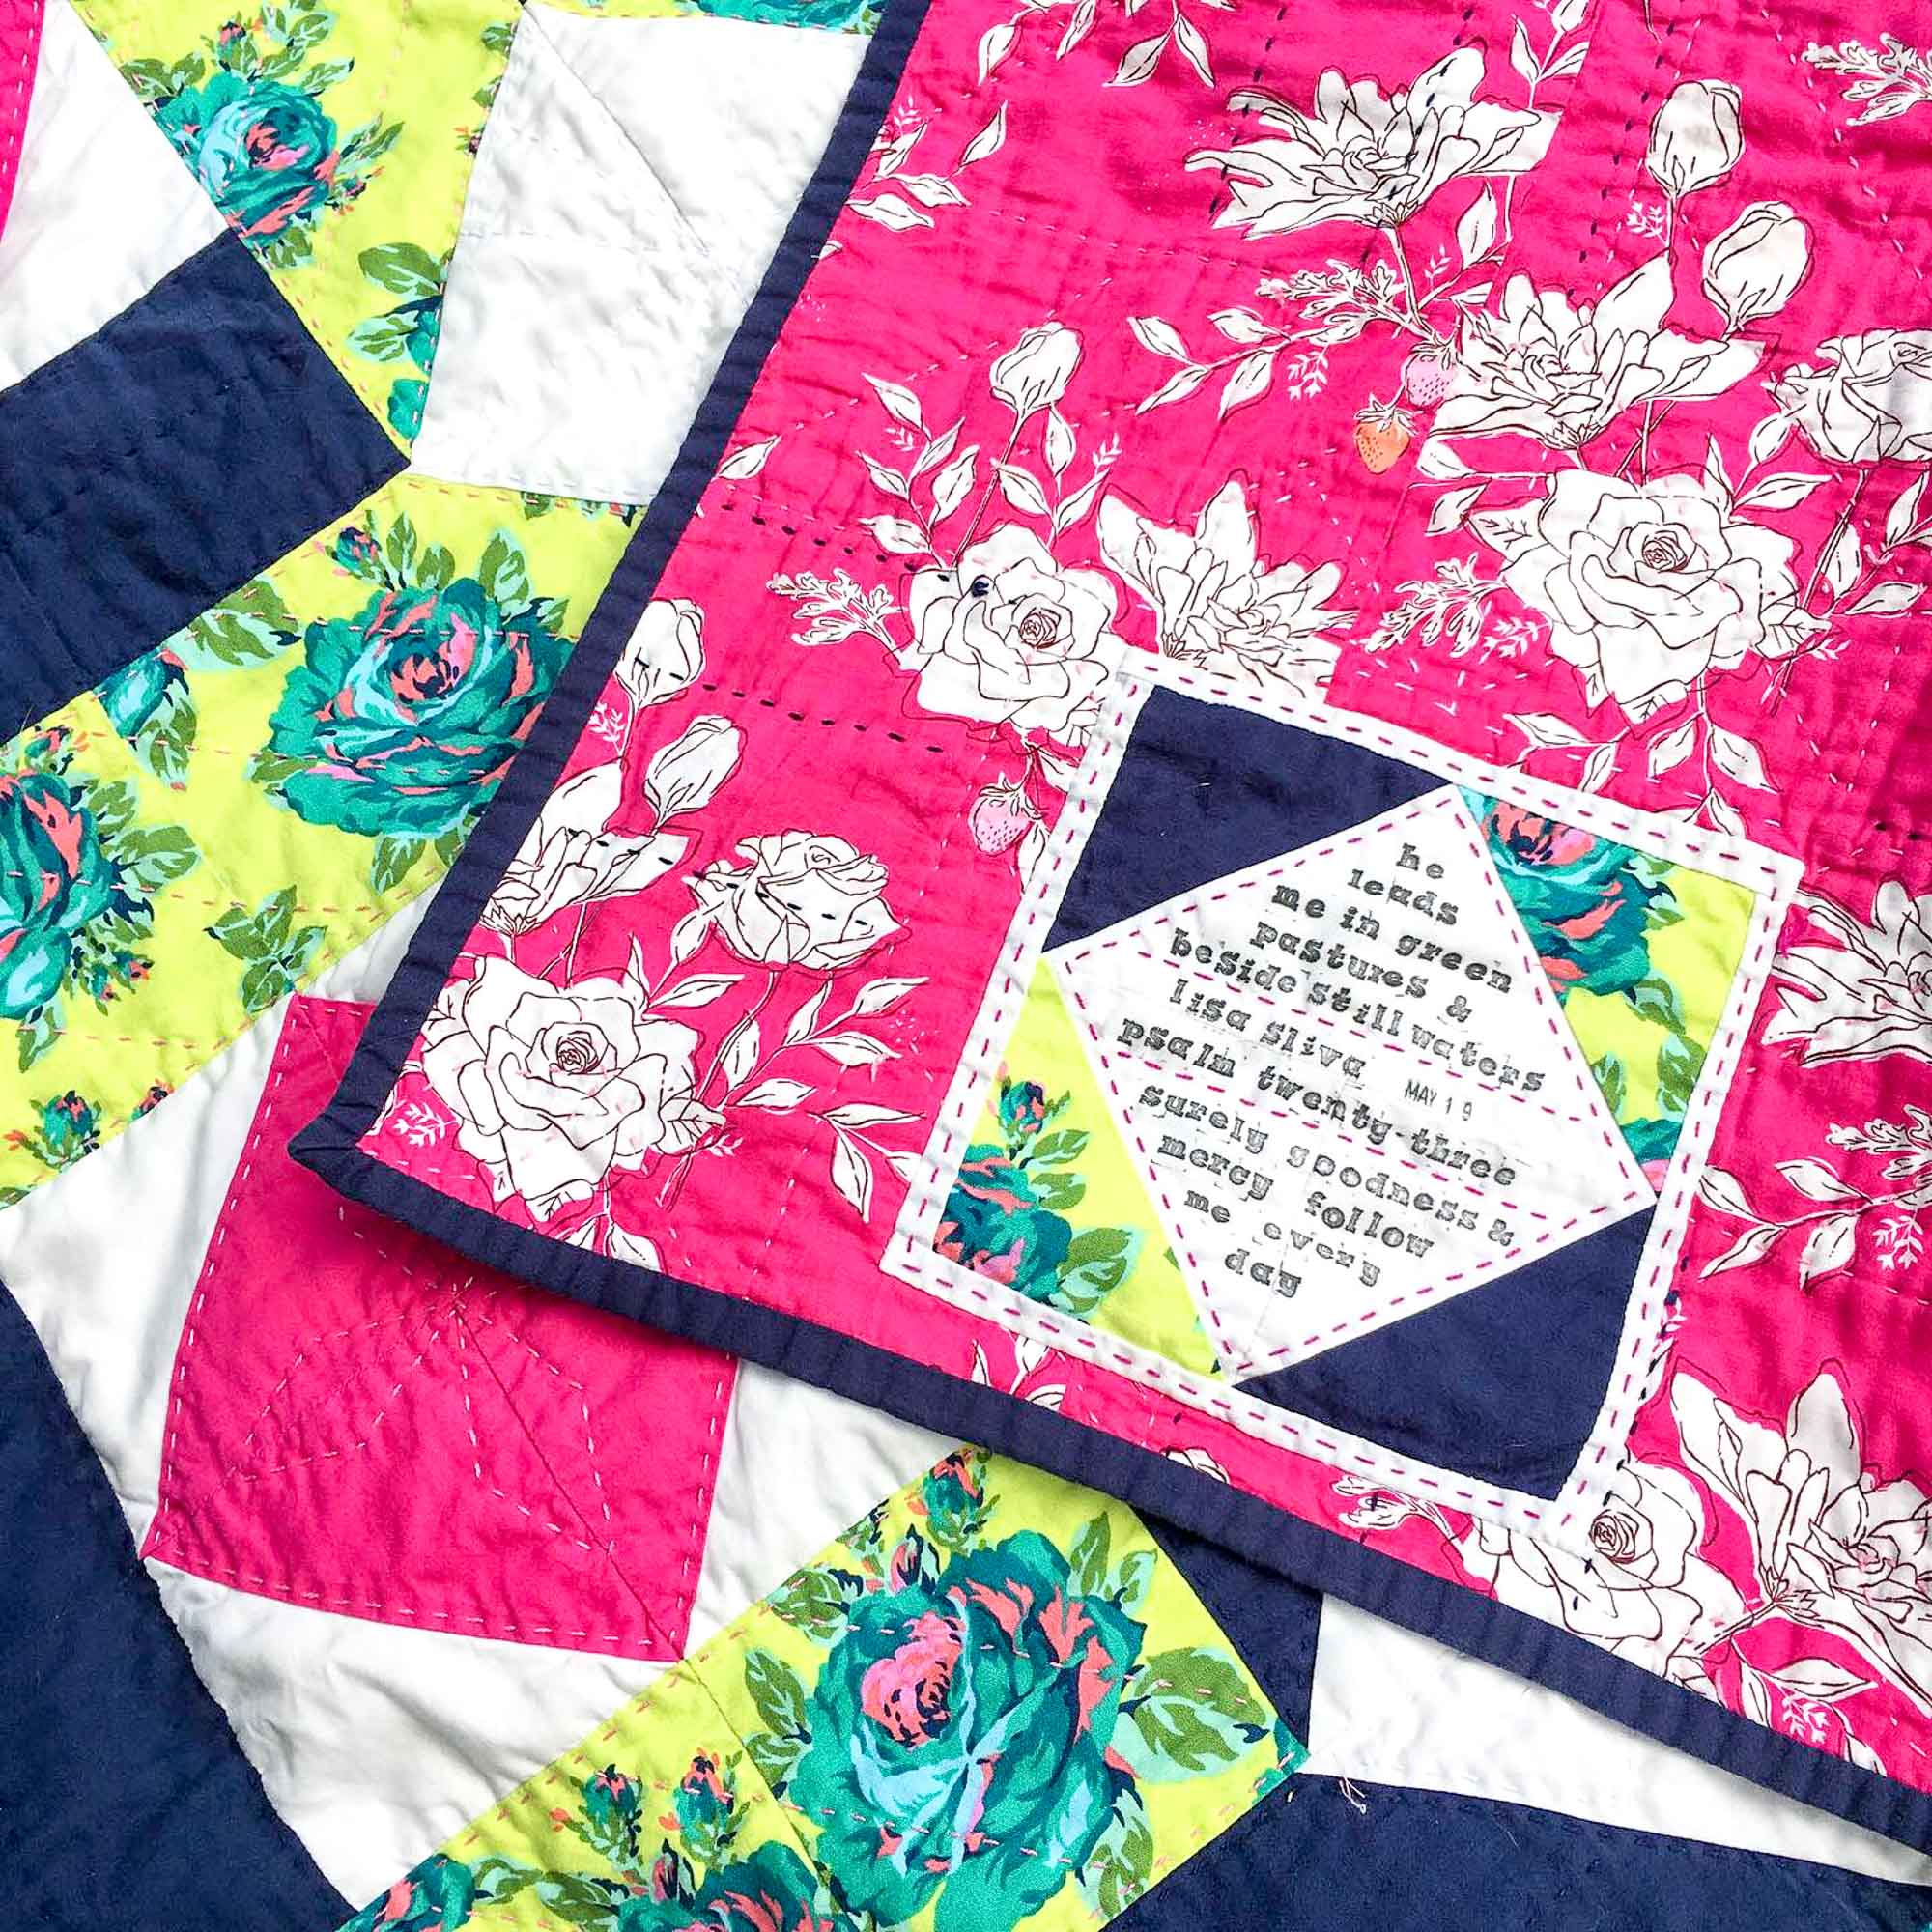 How to Add a Label to a Quilt - Diary of a Quilter - Sewing for